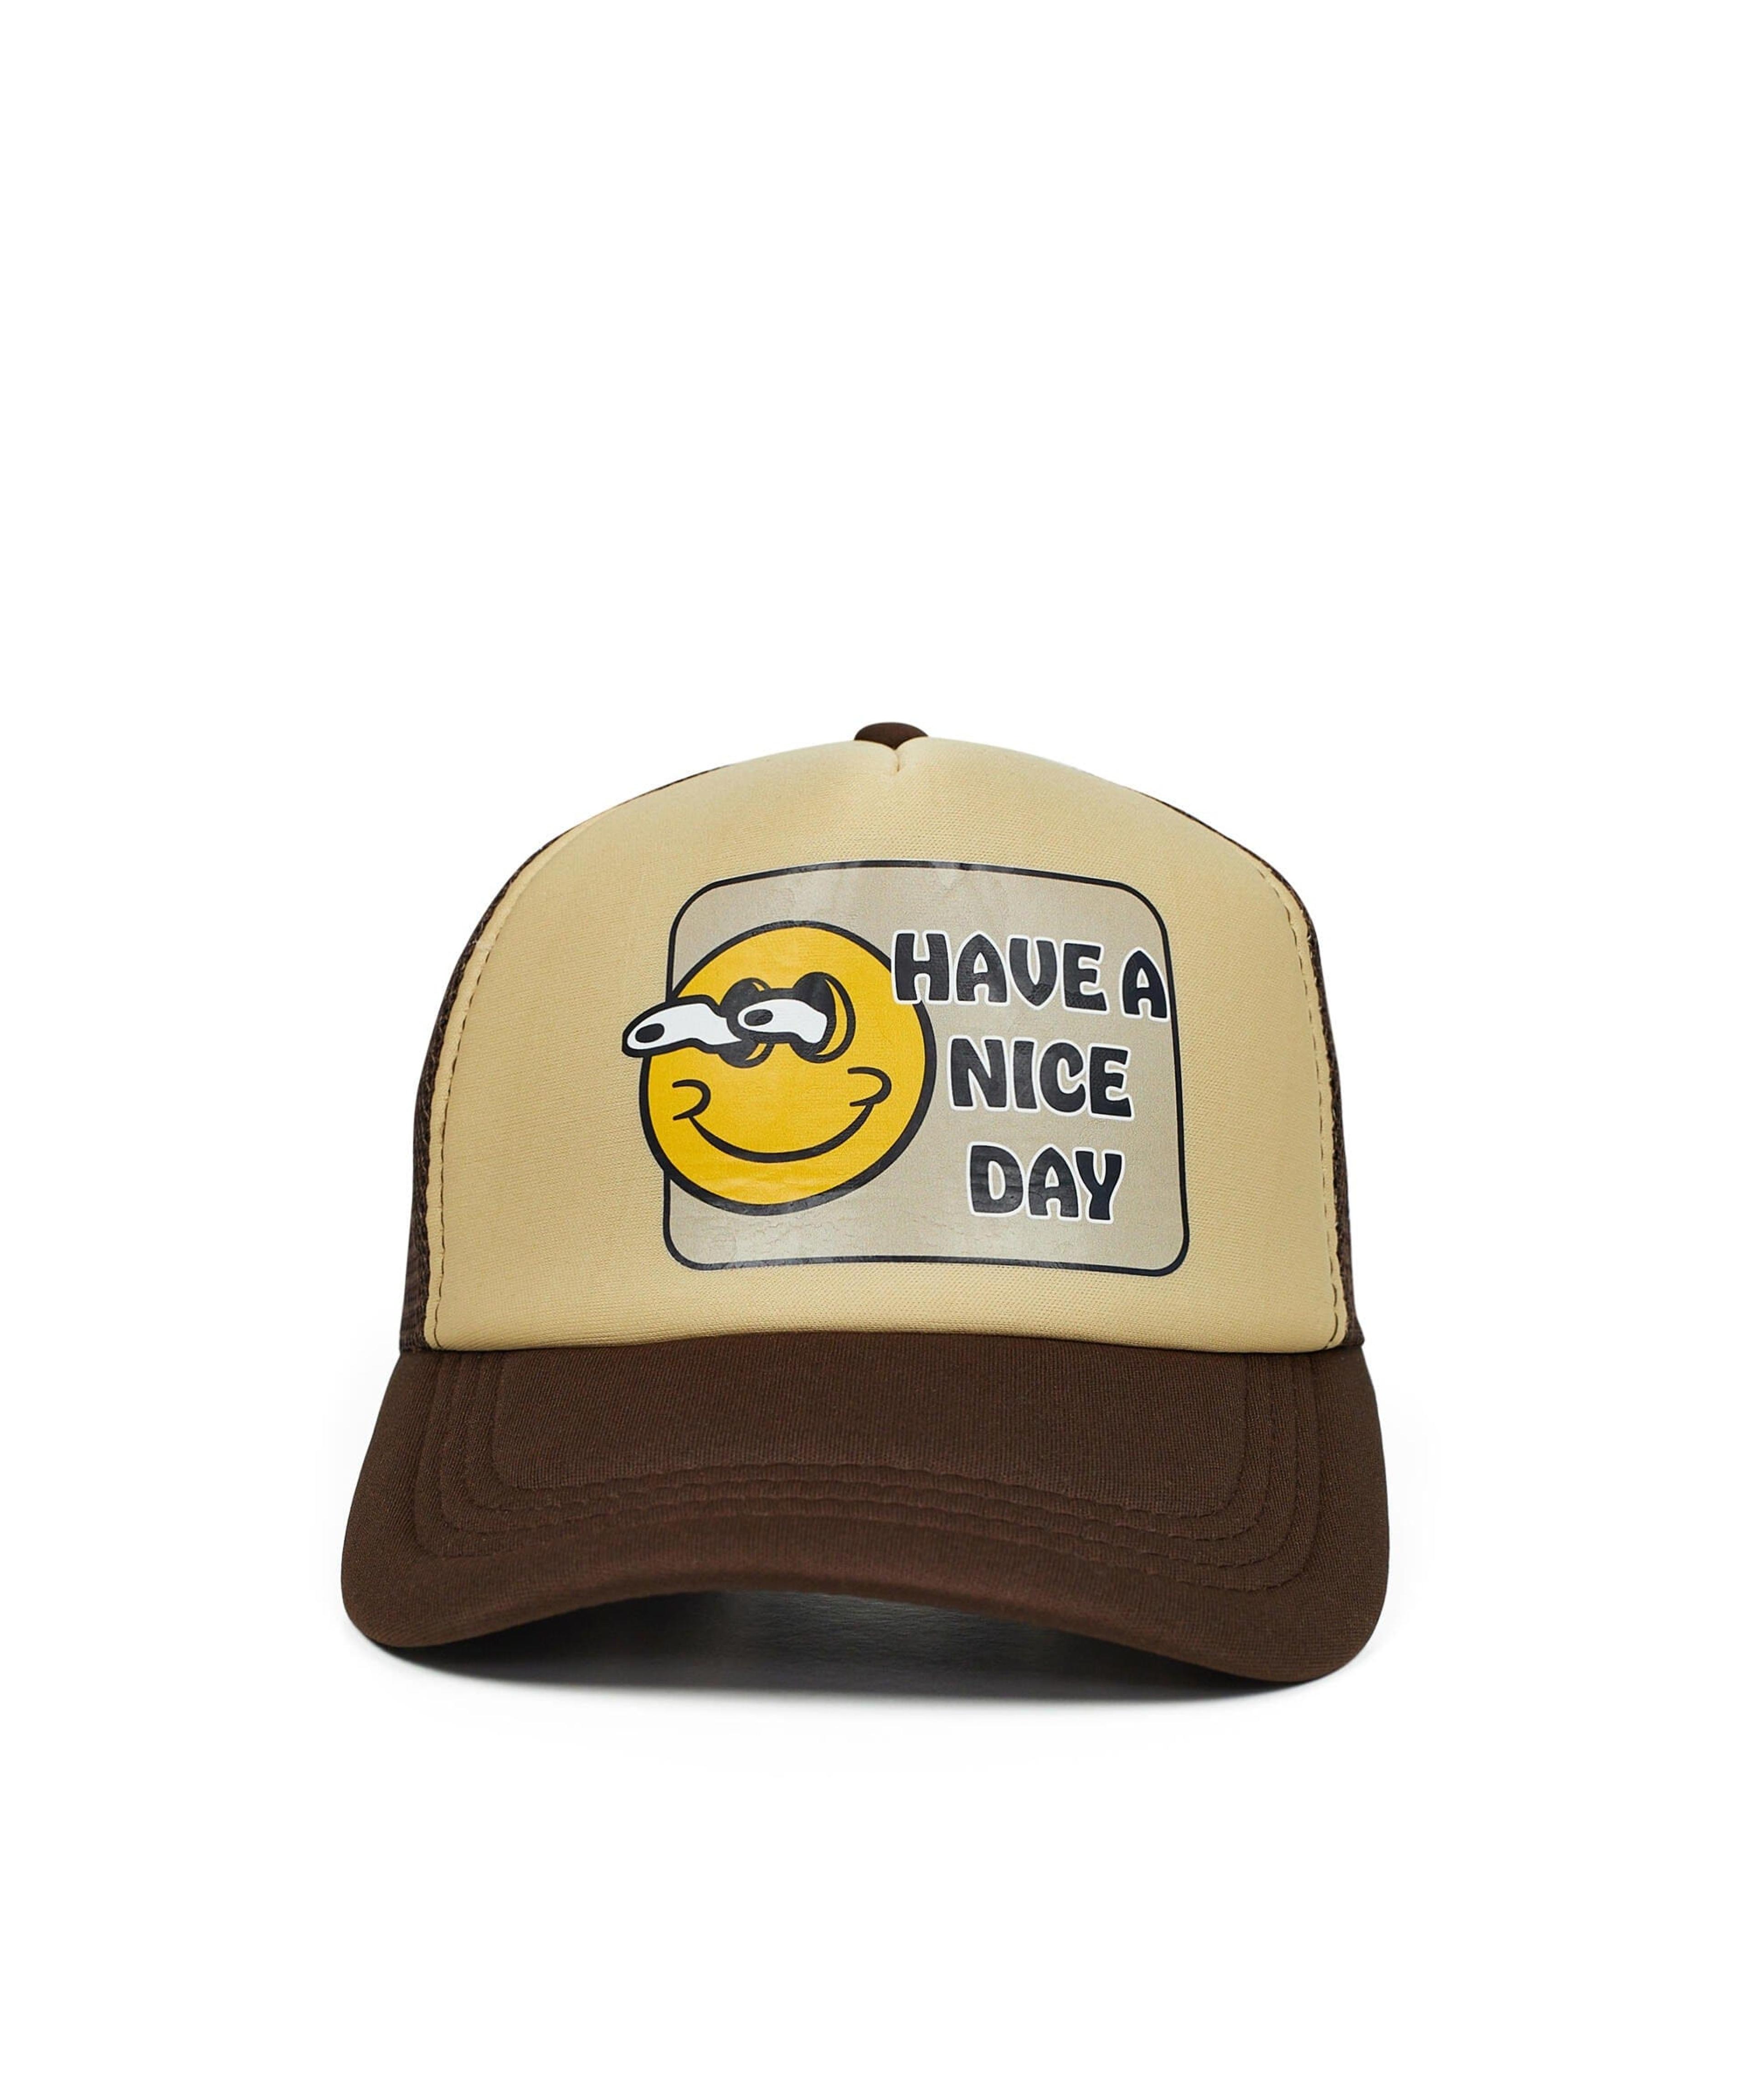 Have A Nice Day Cap - Brown